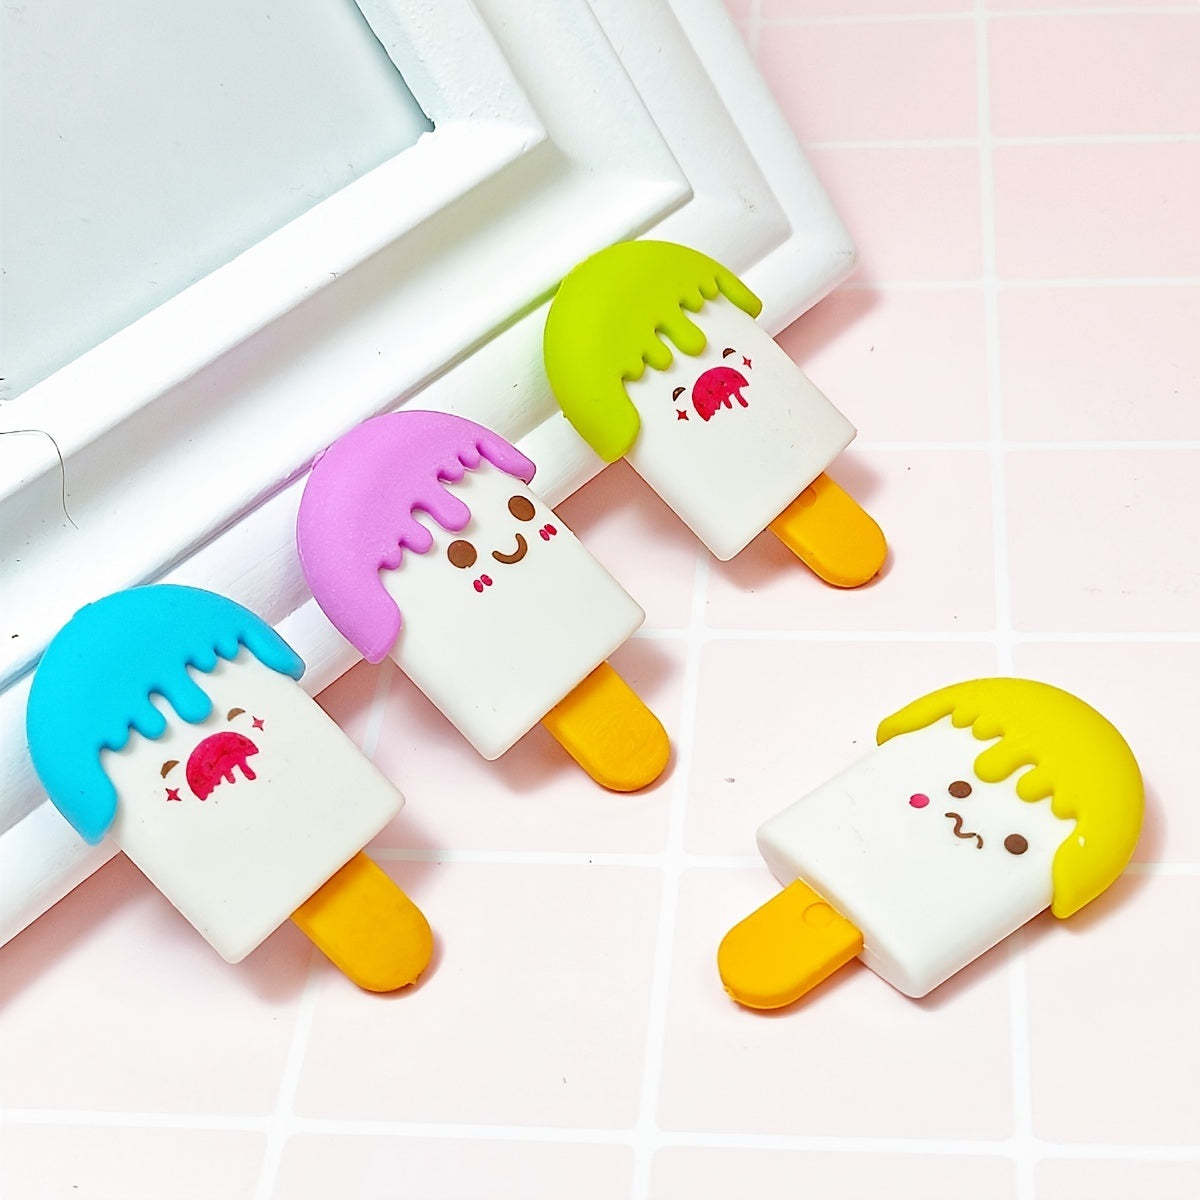 Four colorful 4pcs Ice Cream Shaped Erasers with cartoon faces, displayed on a bench against a backdrop labeled "Chanel.